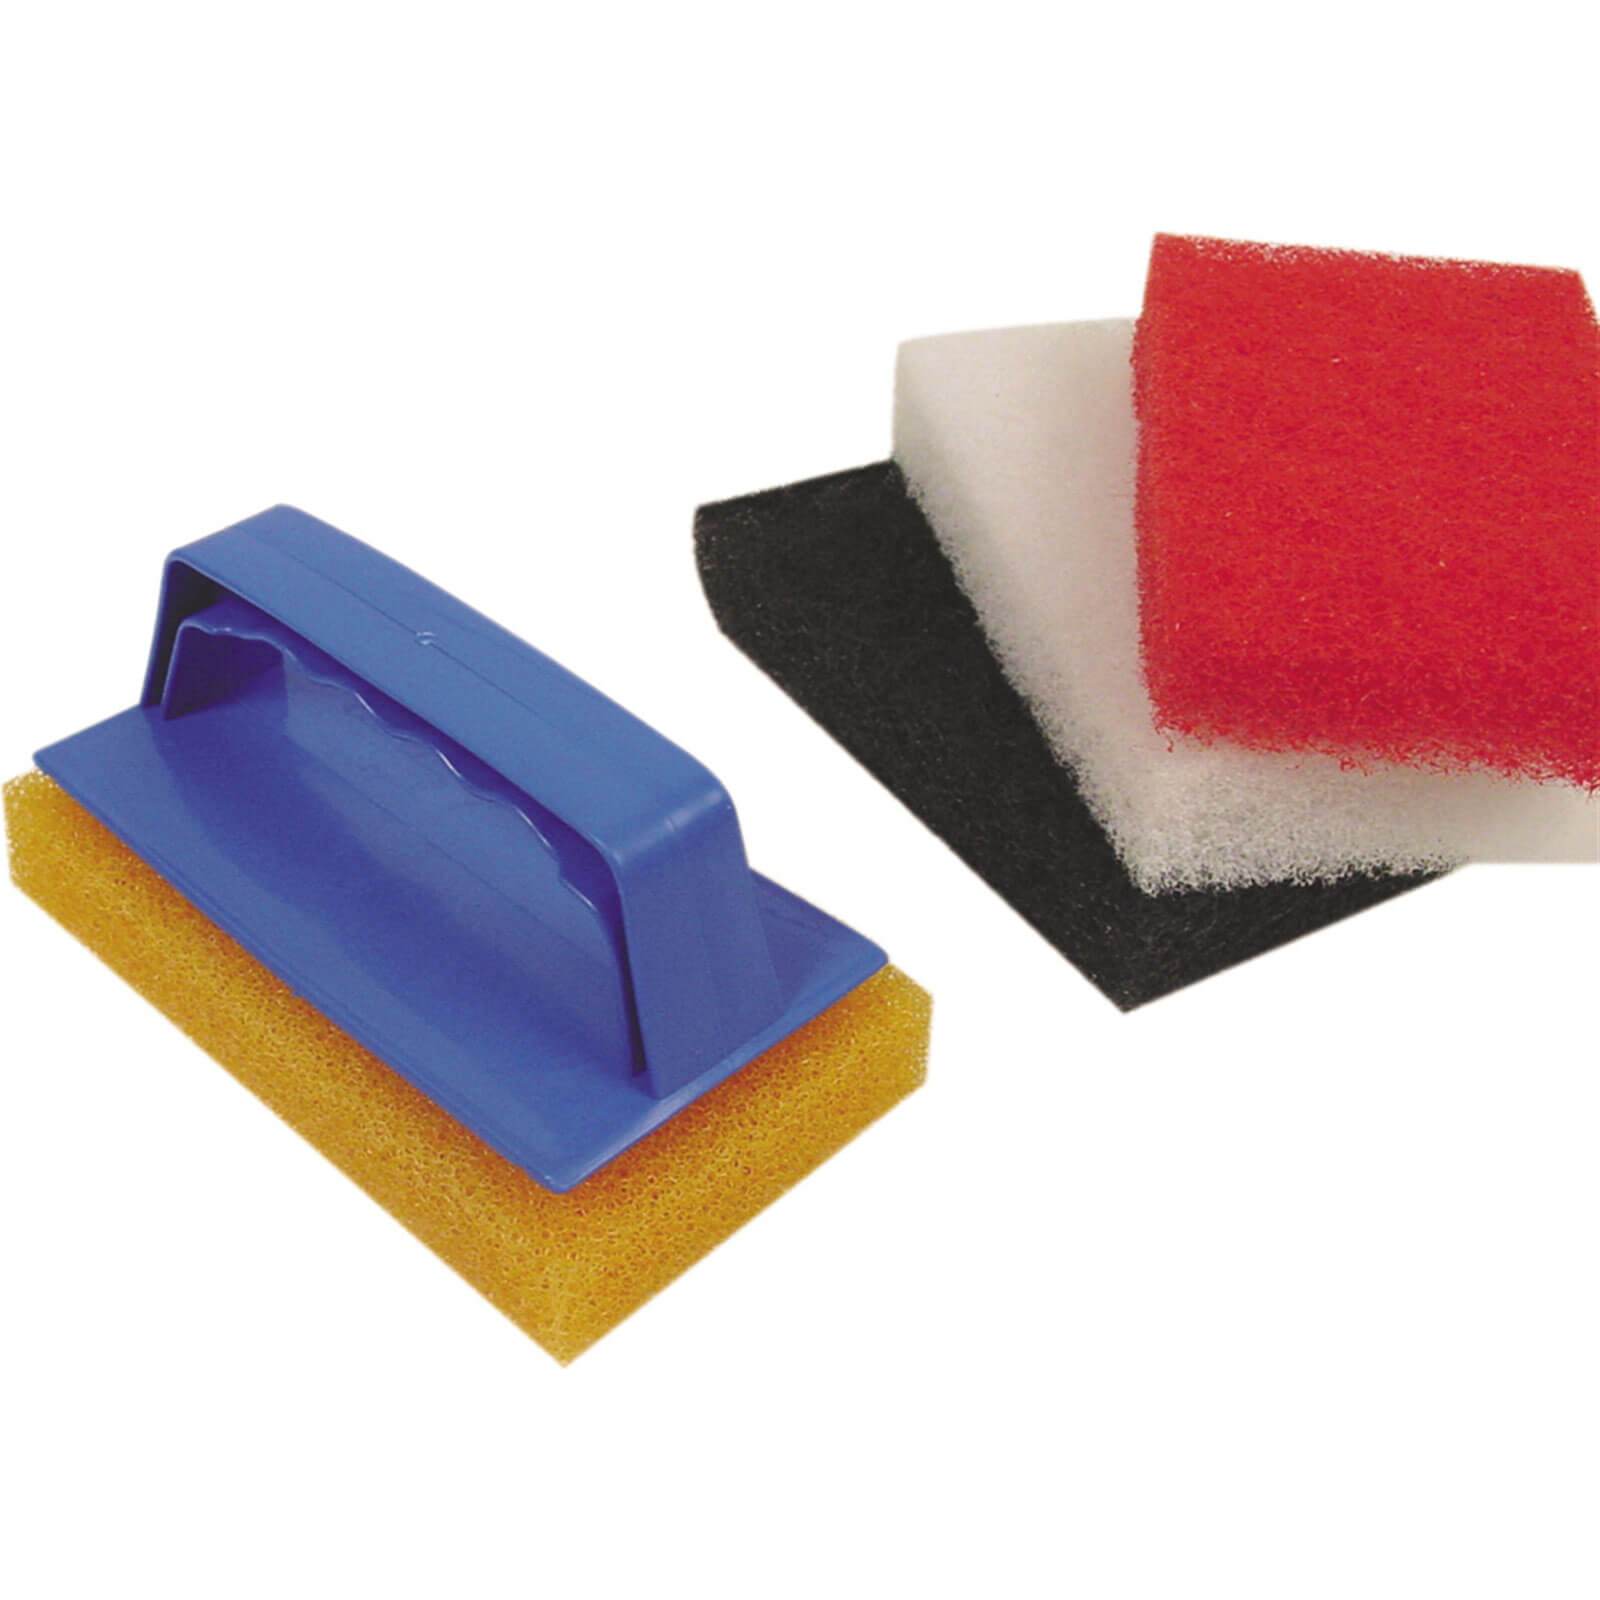 Photos - Other for Construction Vitrex Grout Clean Up and Tile Polishing Kit 